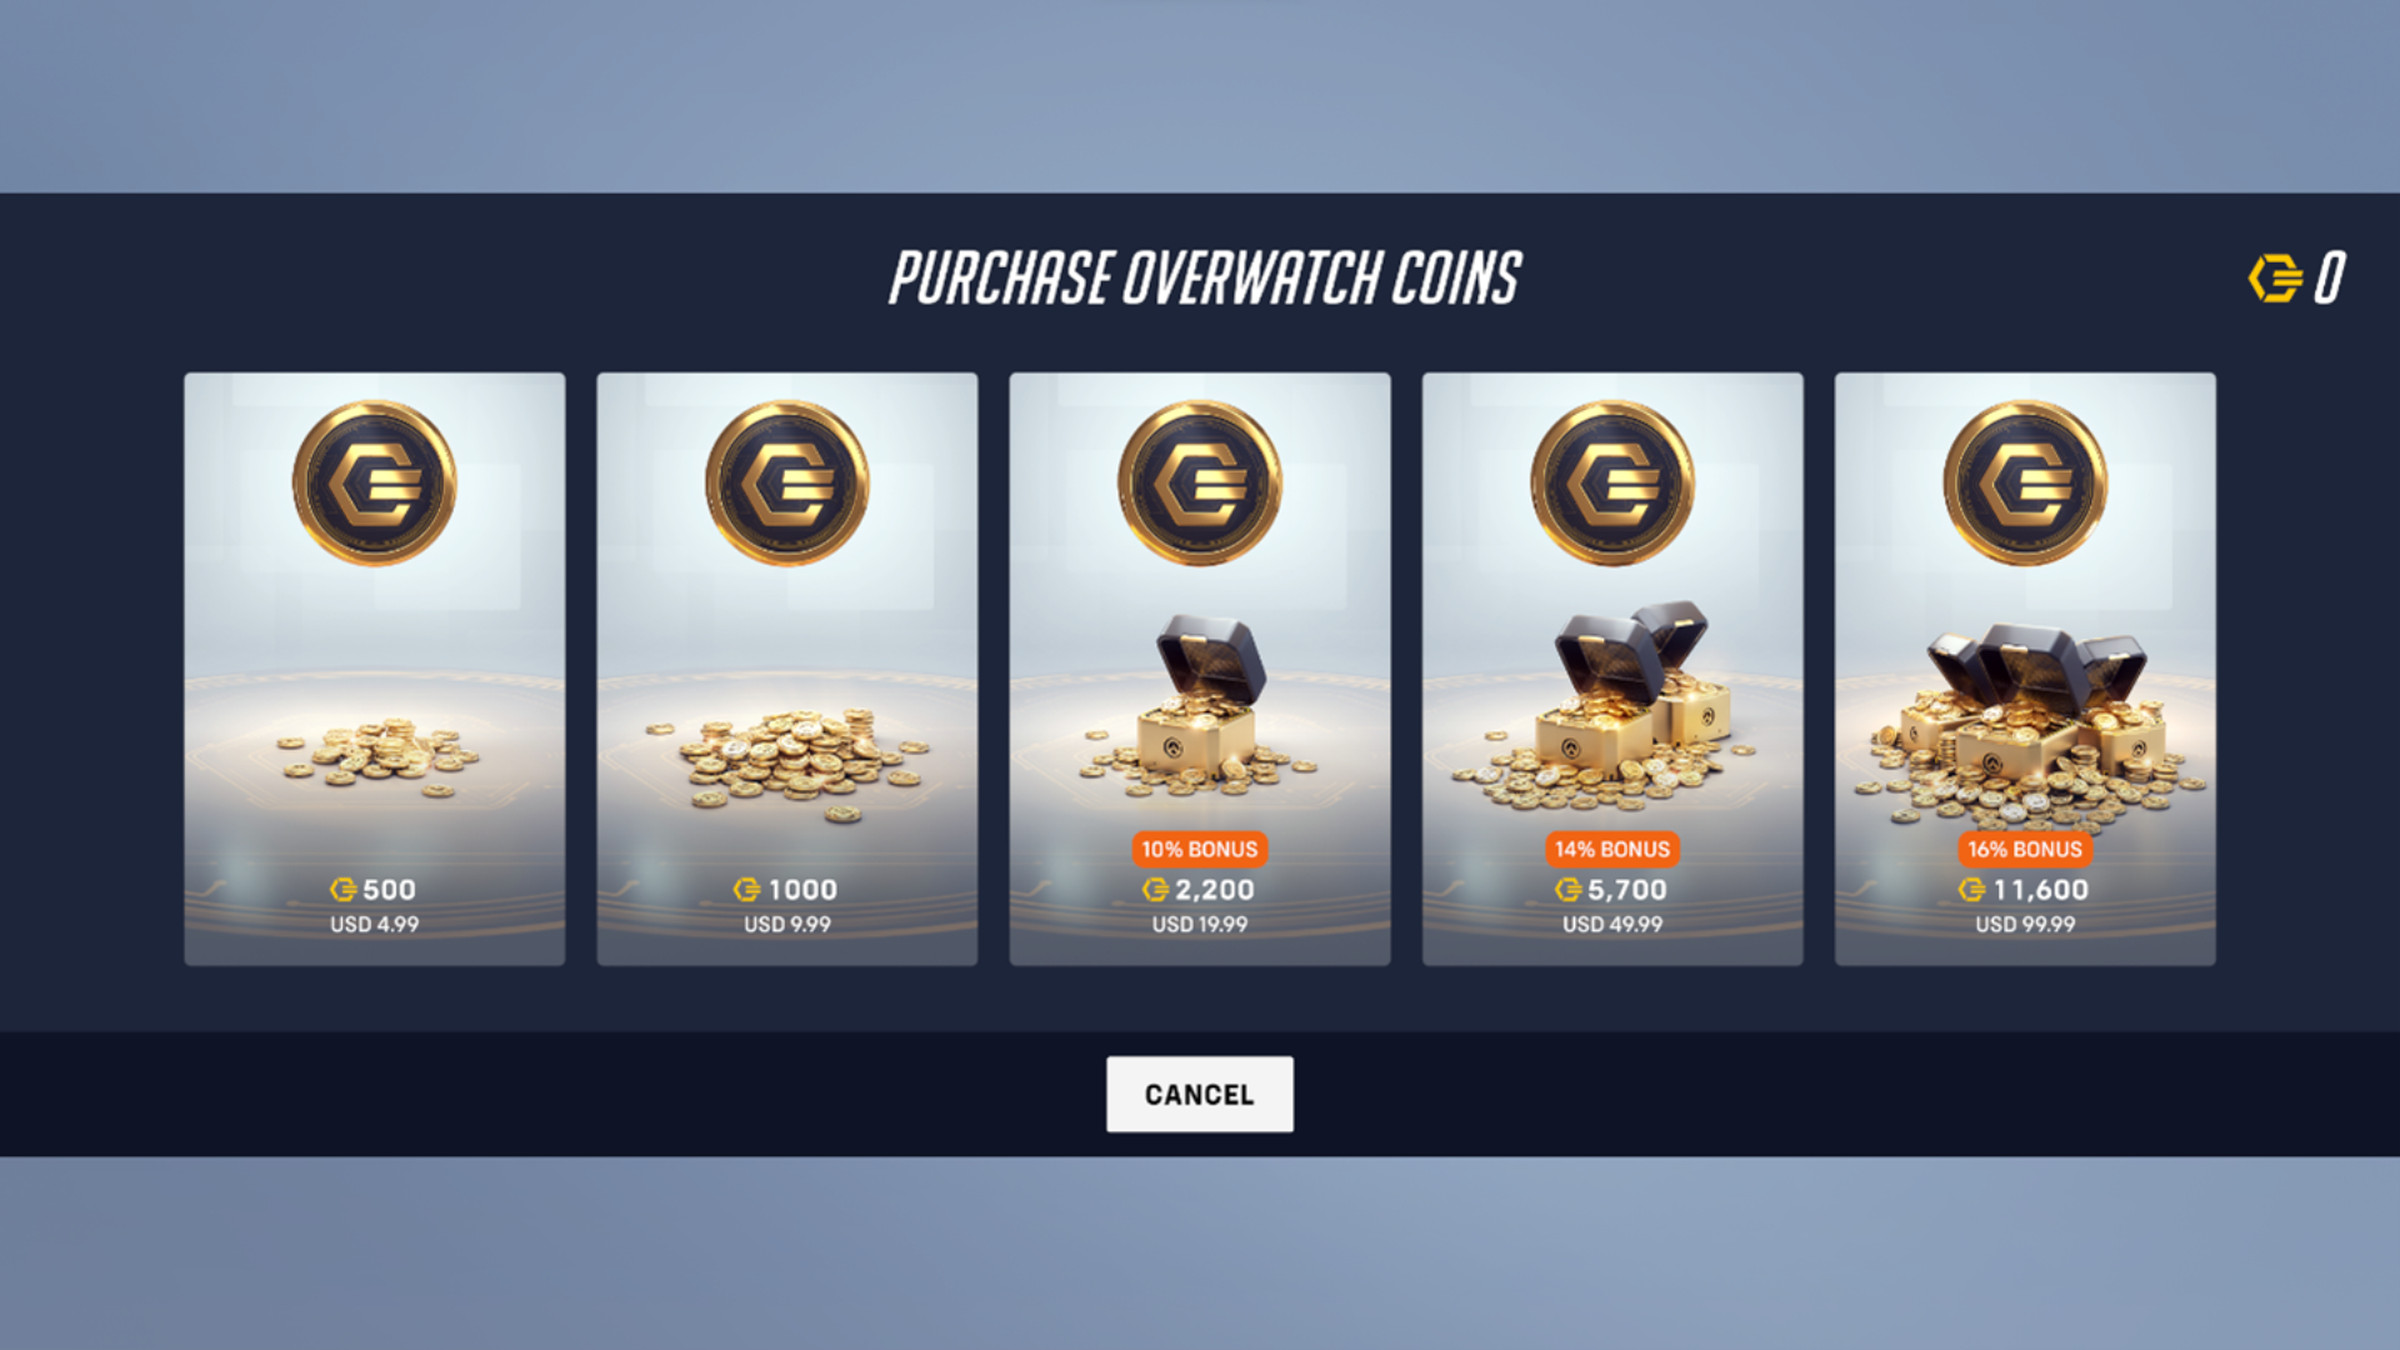 Screenshot of the Overwatch 2 cash shop selling Overwatch Coins the new in-game currency at various price points